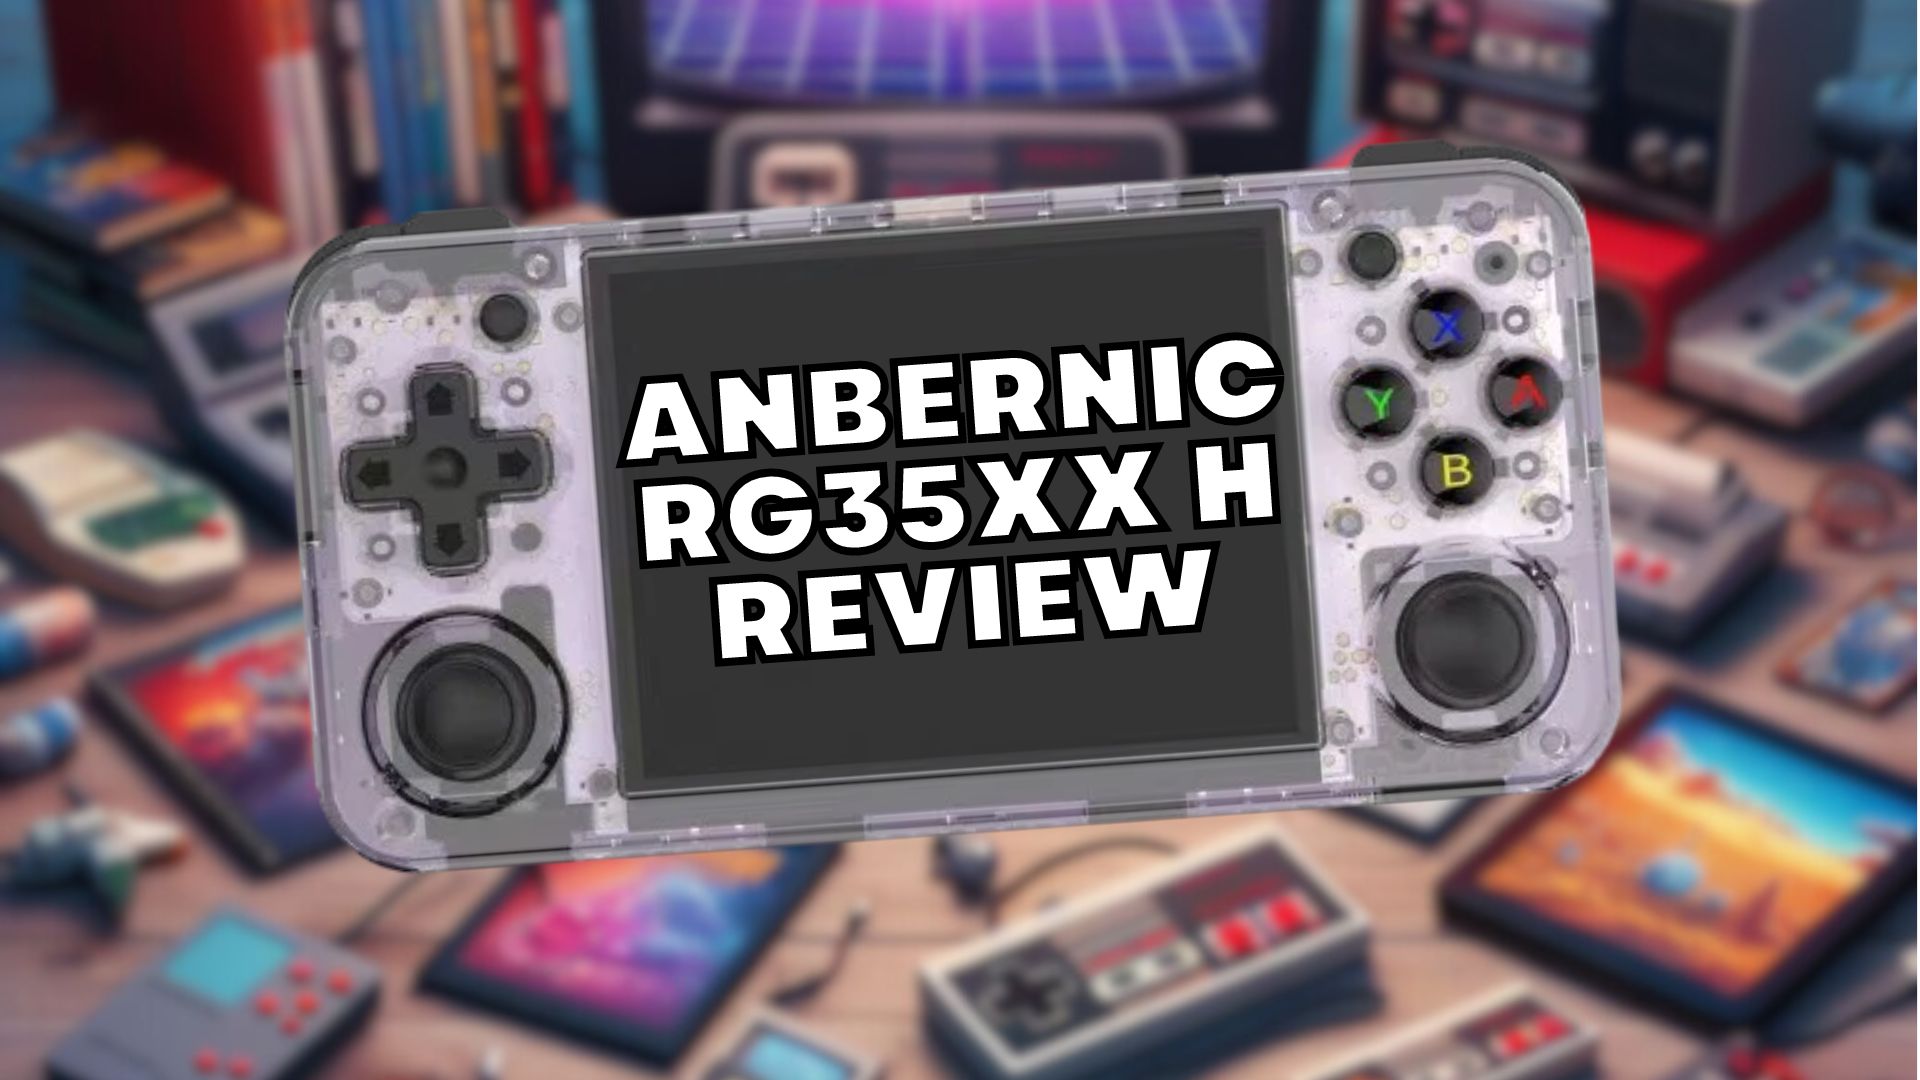 Anbernic RG35XX H Review with video – Great budget retro gaming handheld